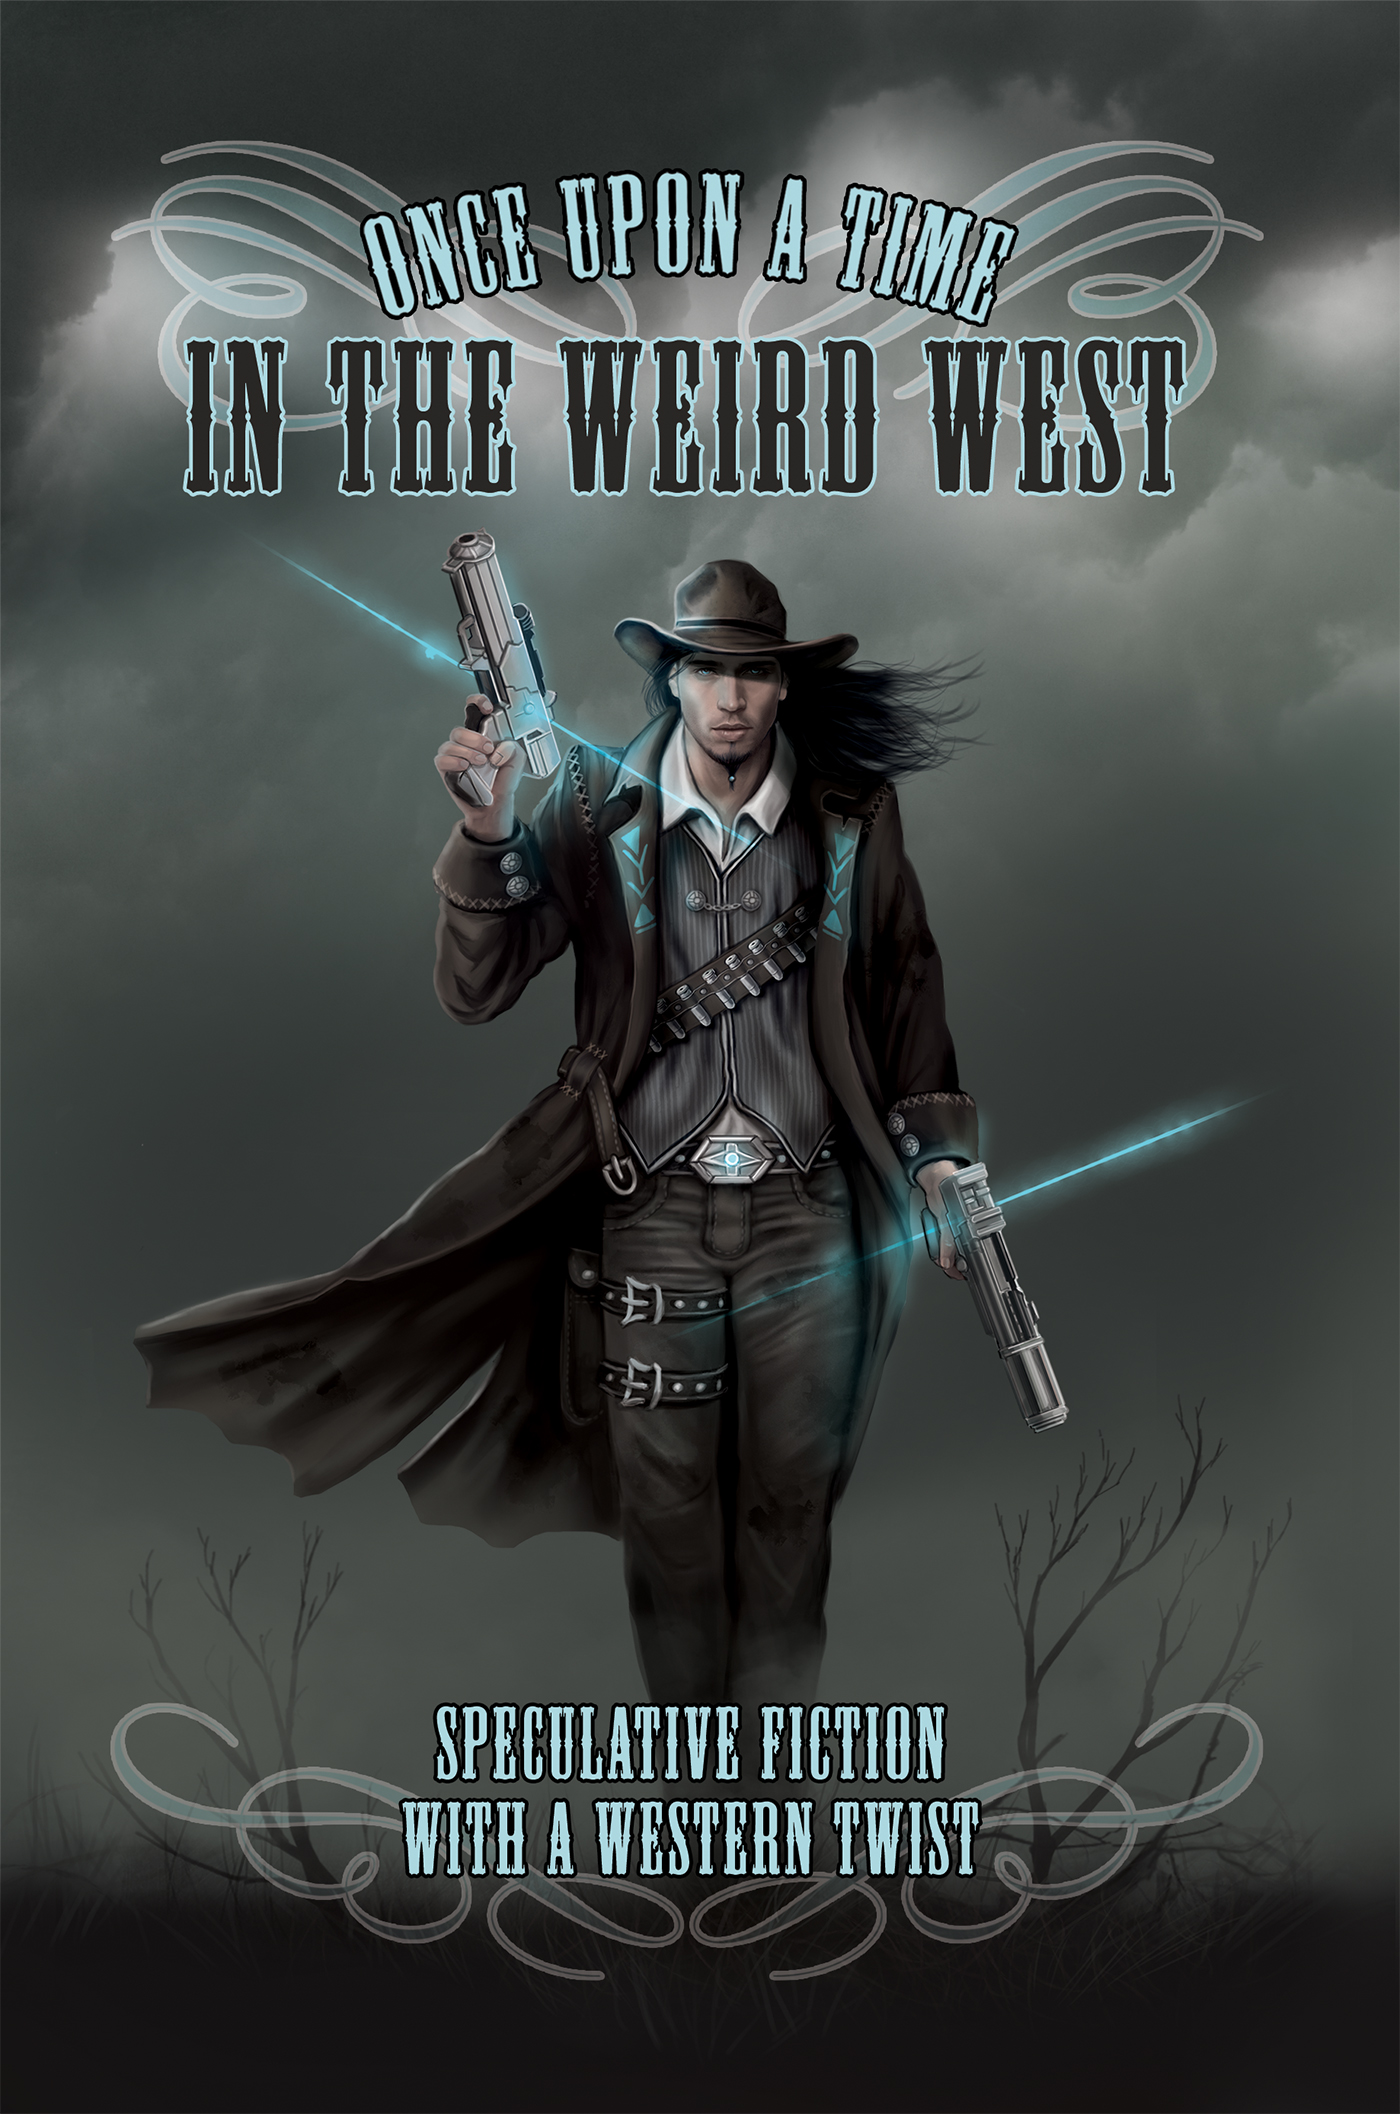 Weird West download the new version for windows